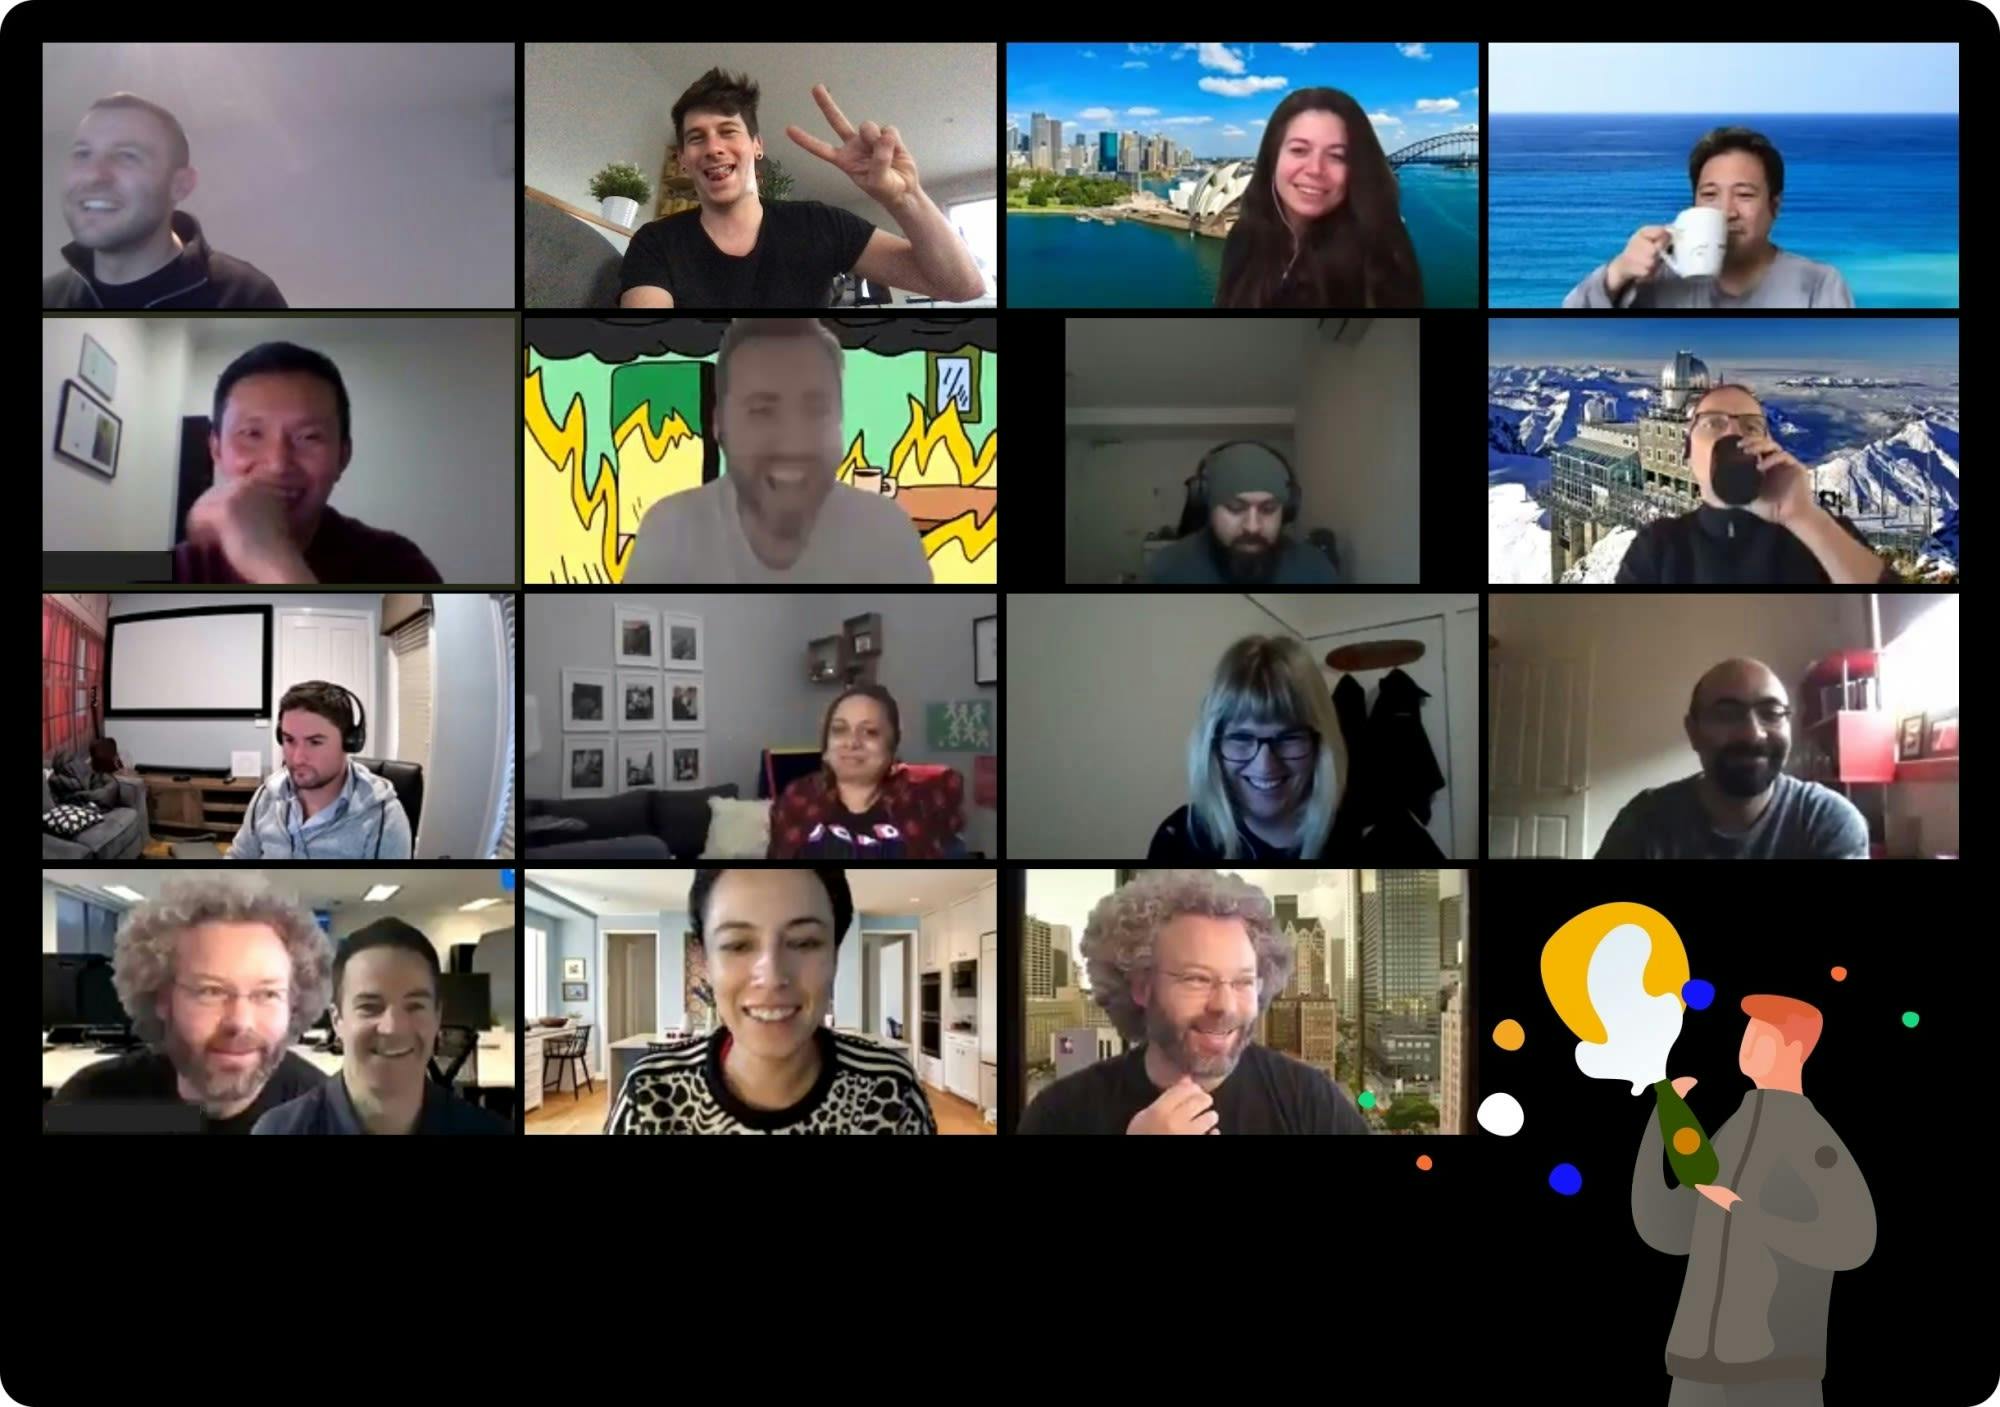 A screenshot of a grid of people in an online meeting